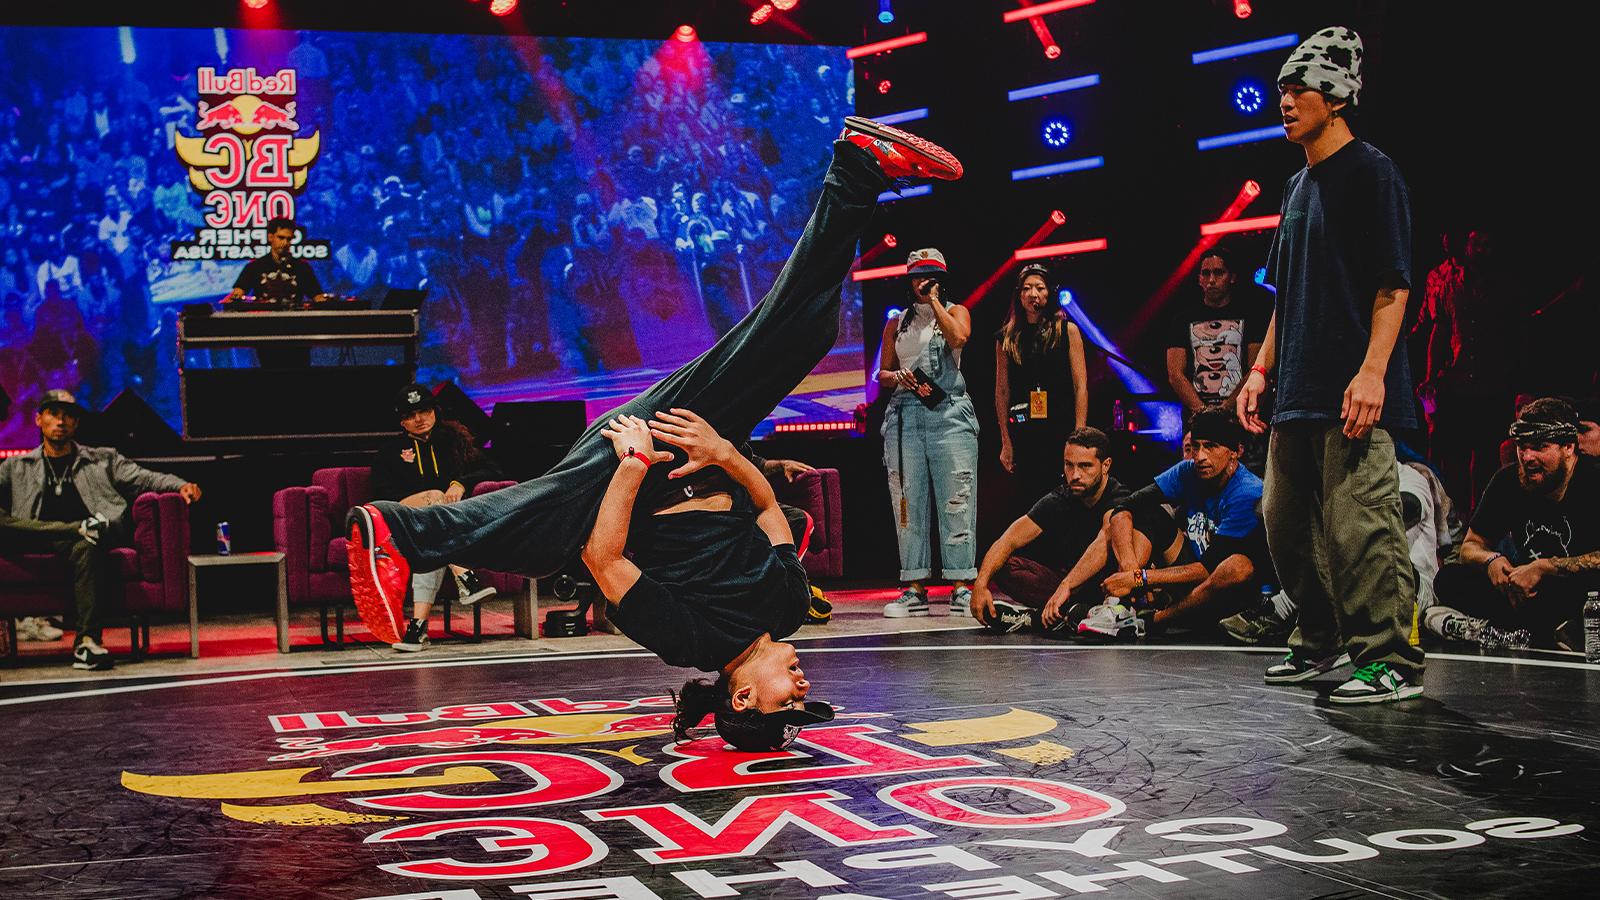 A dancer is doing a hands-free headstand with their legs spread while their competitor, 观众, and the judges watch.